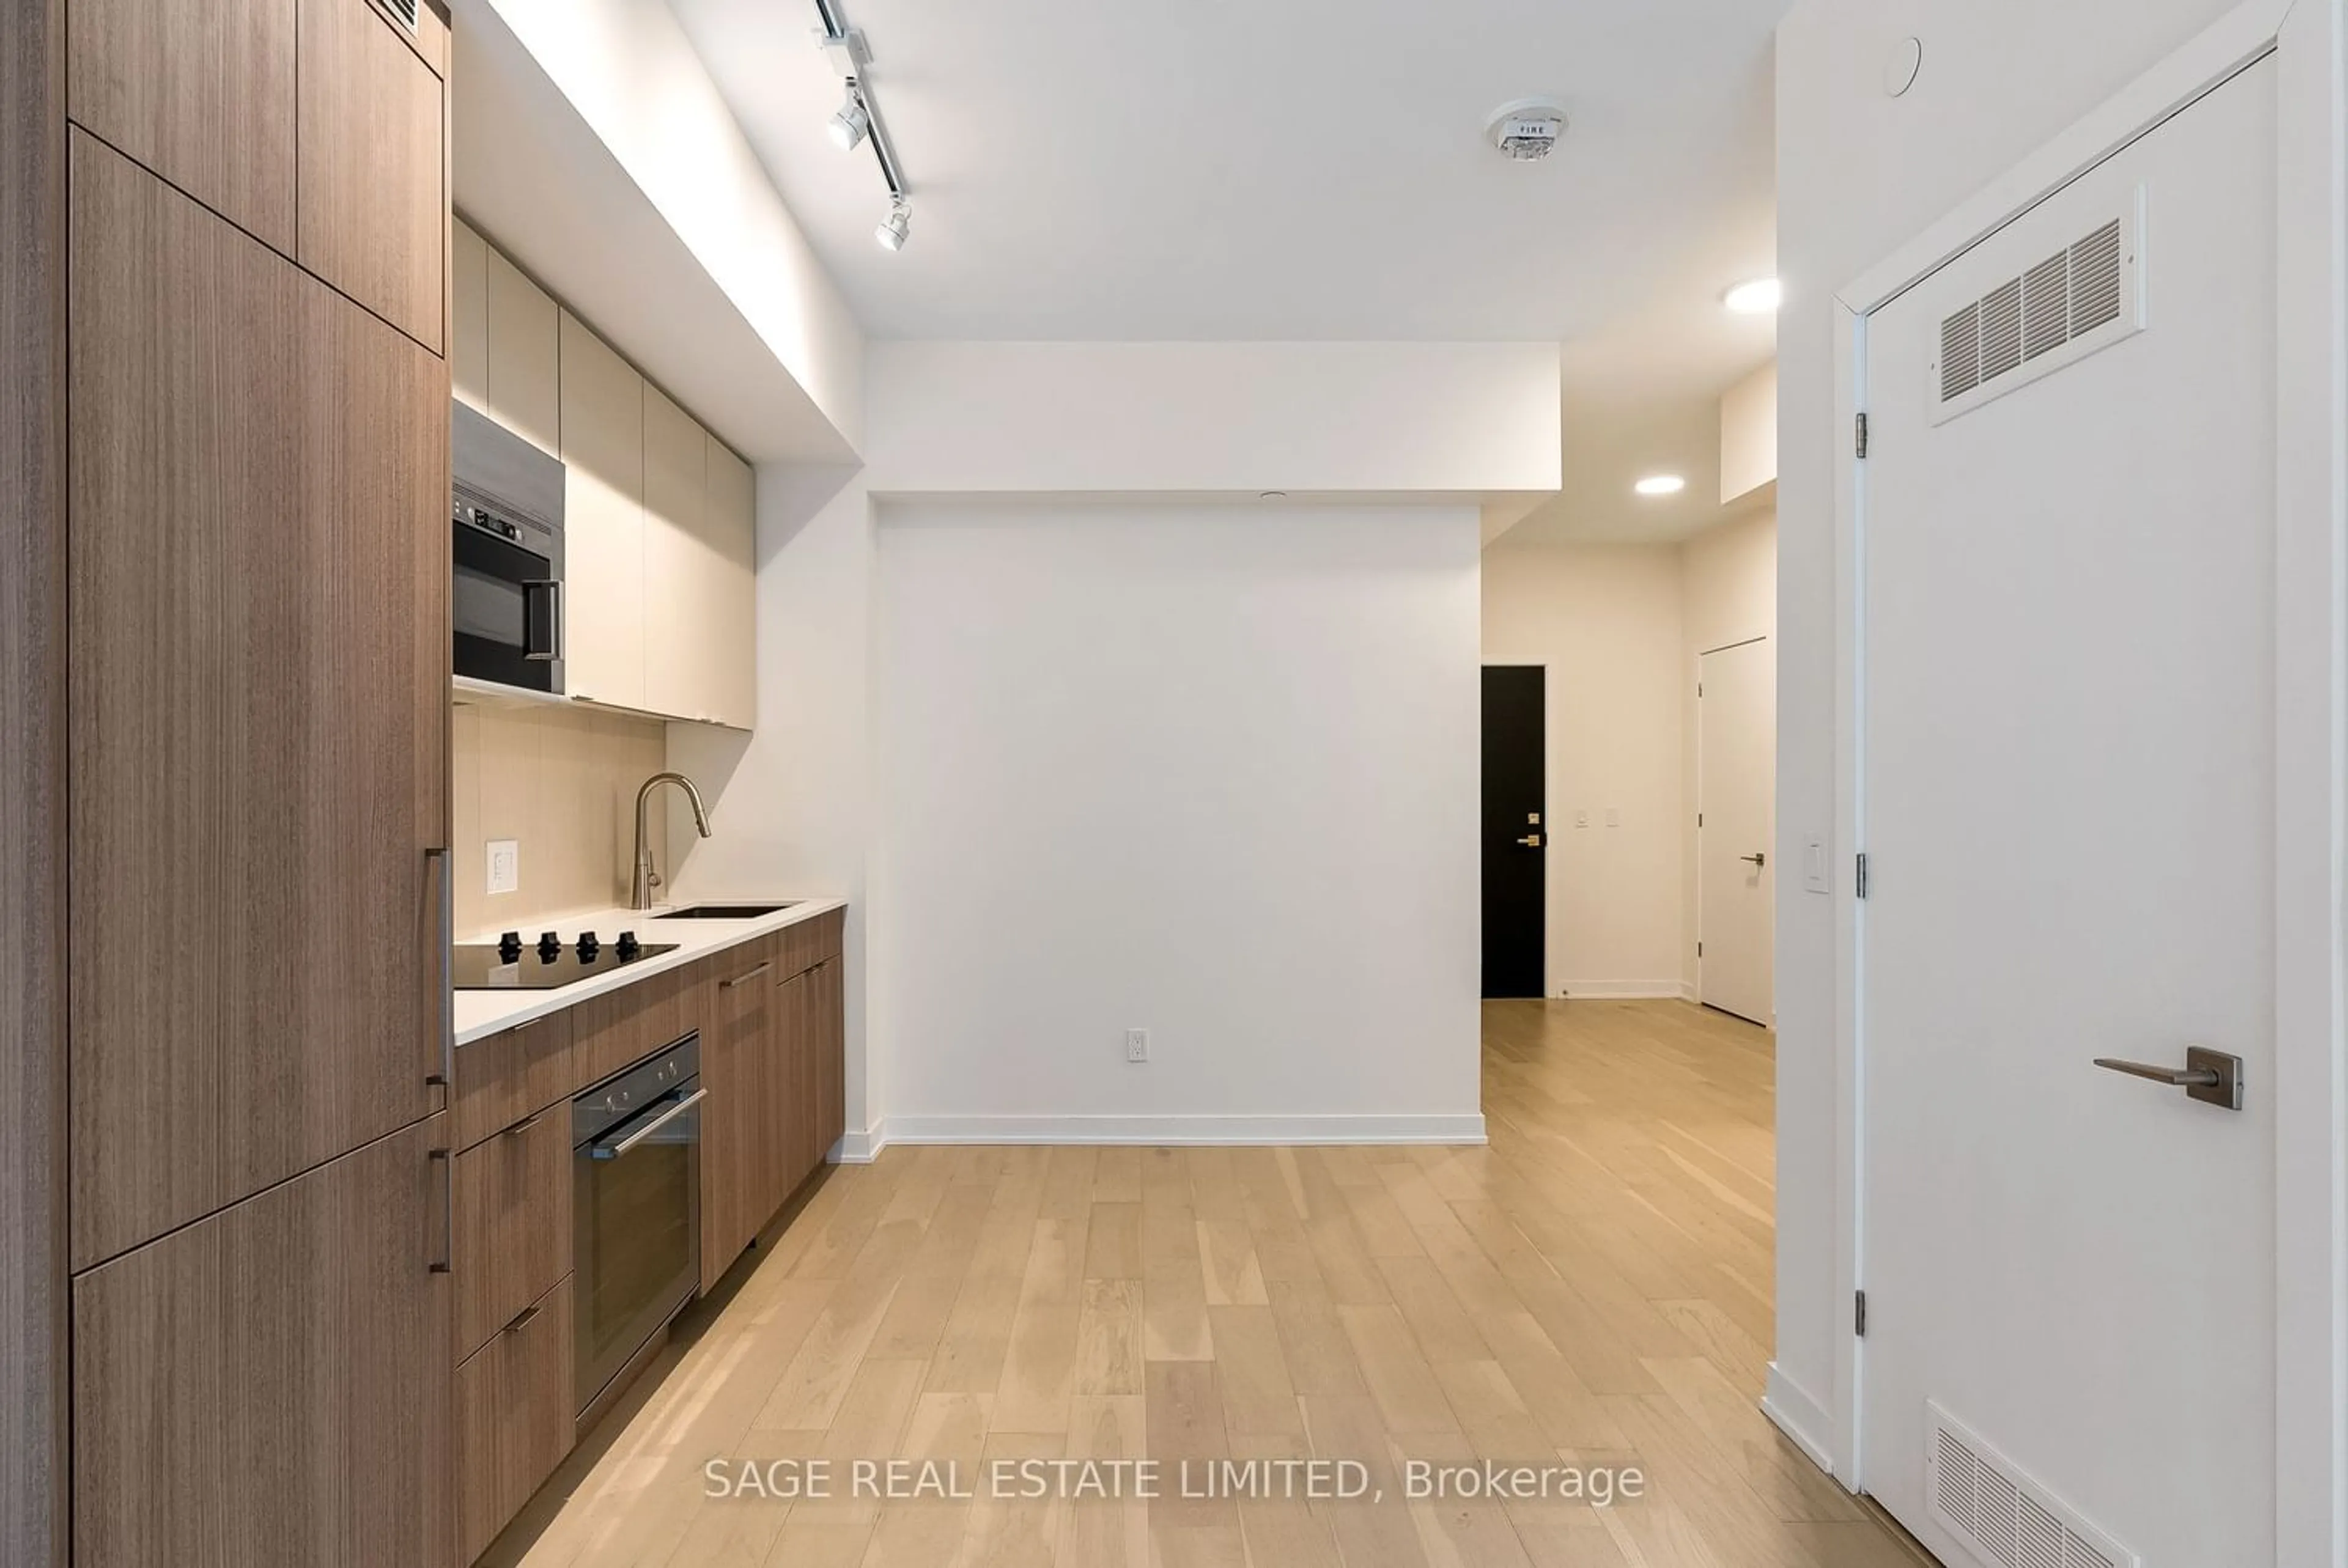 Standard kitchen for 840 St.Clair Ave #205, Toronto Ontario M6C 0A4